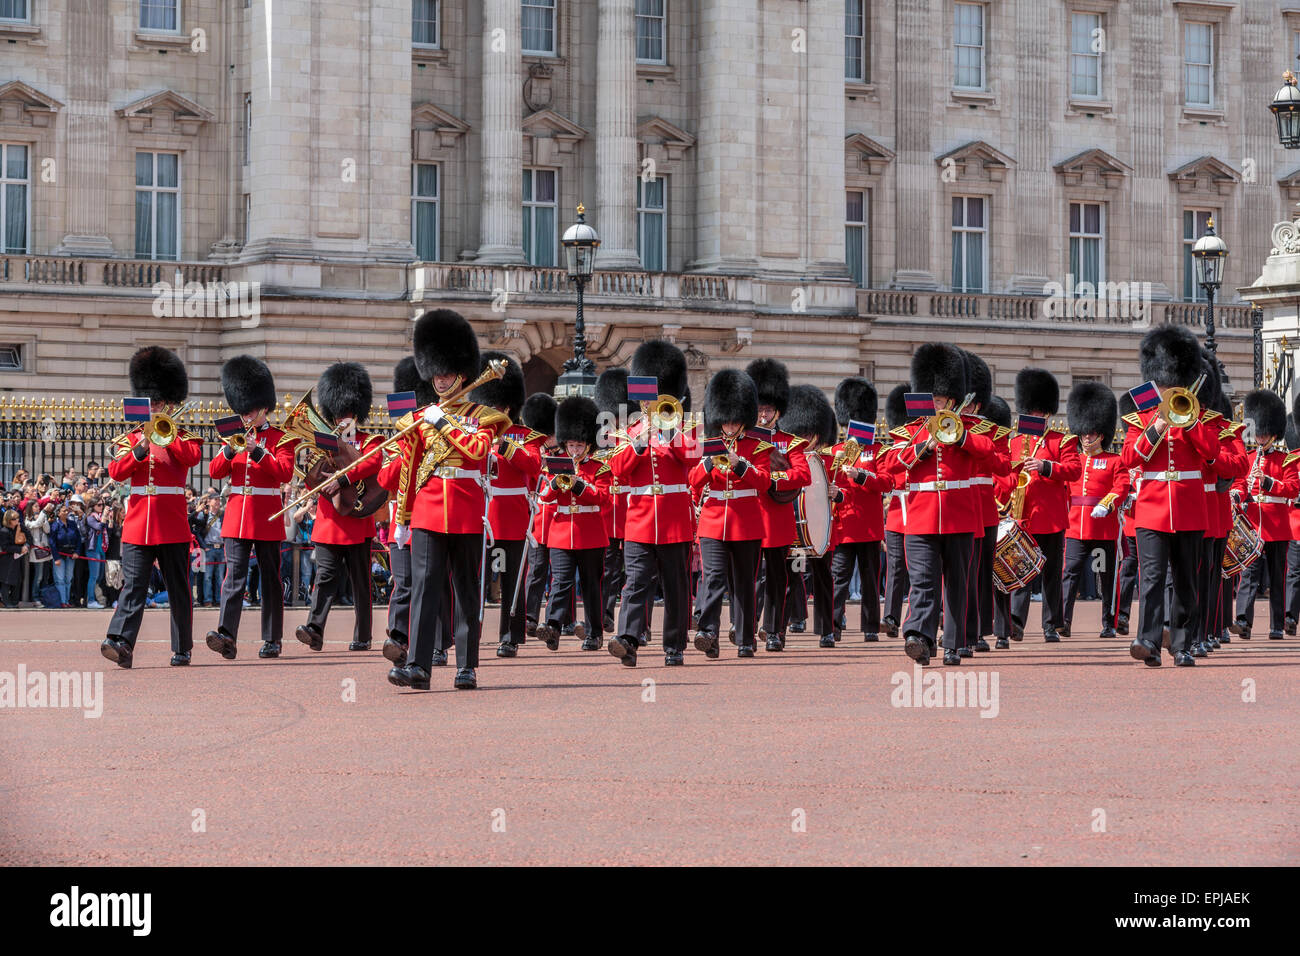 A Landscape image of The Band of the Coldstream Guards marching from Buckingham Palace, London, UK Stock Photo